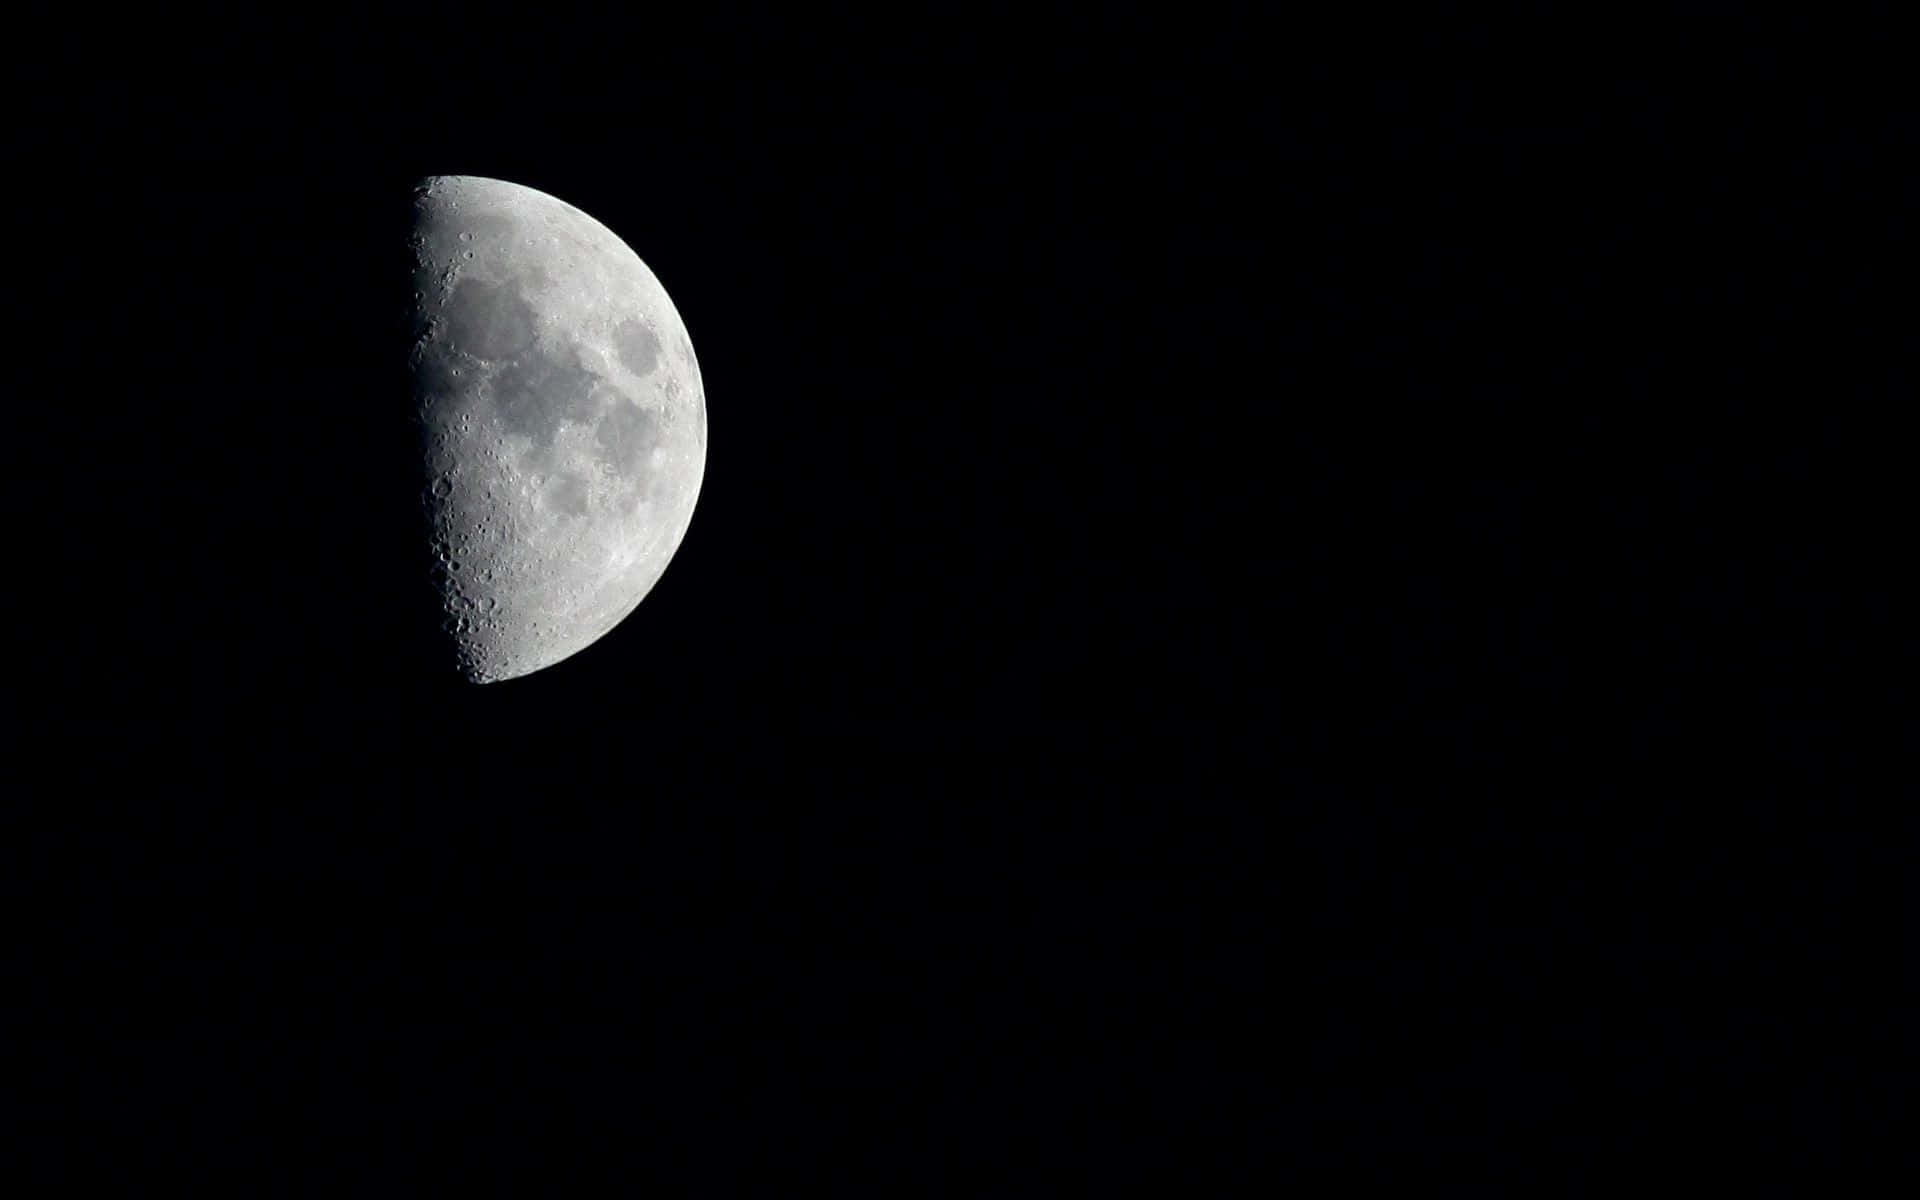 Take a Moment to Admire the Enchanting Beauty of a Half Moon